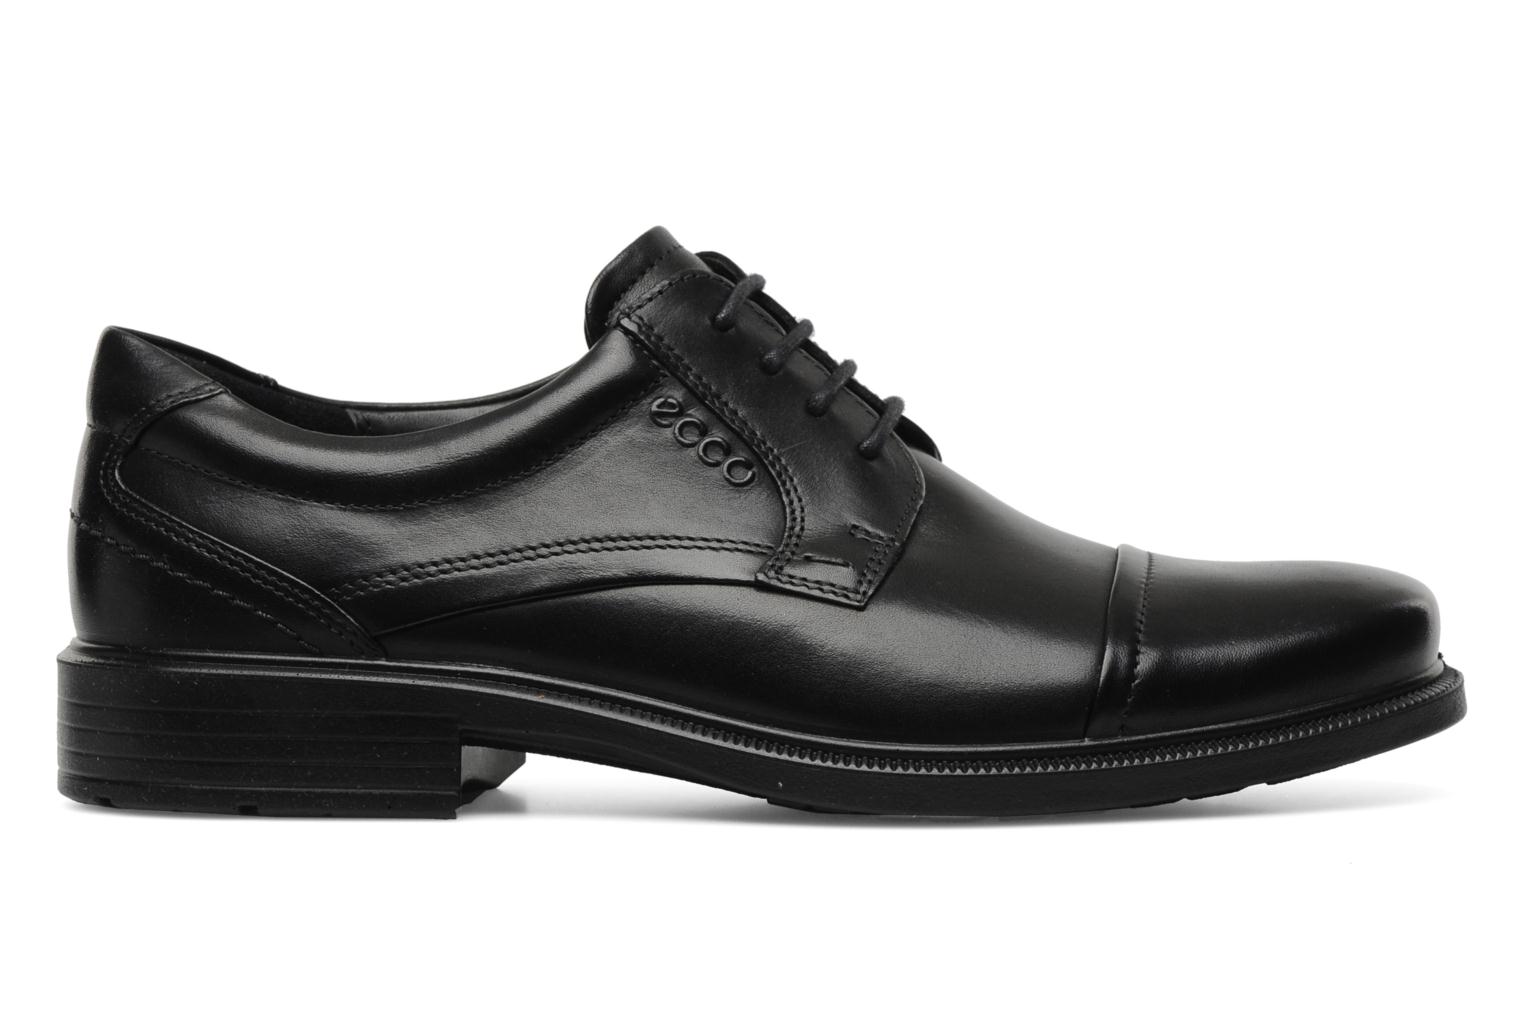 Ecco Dublin Lace-up shoes in Black at Sarenza.co.uk (148372)